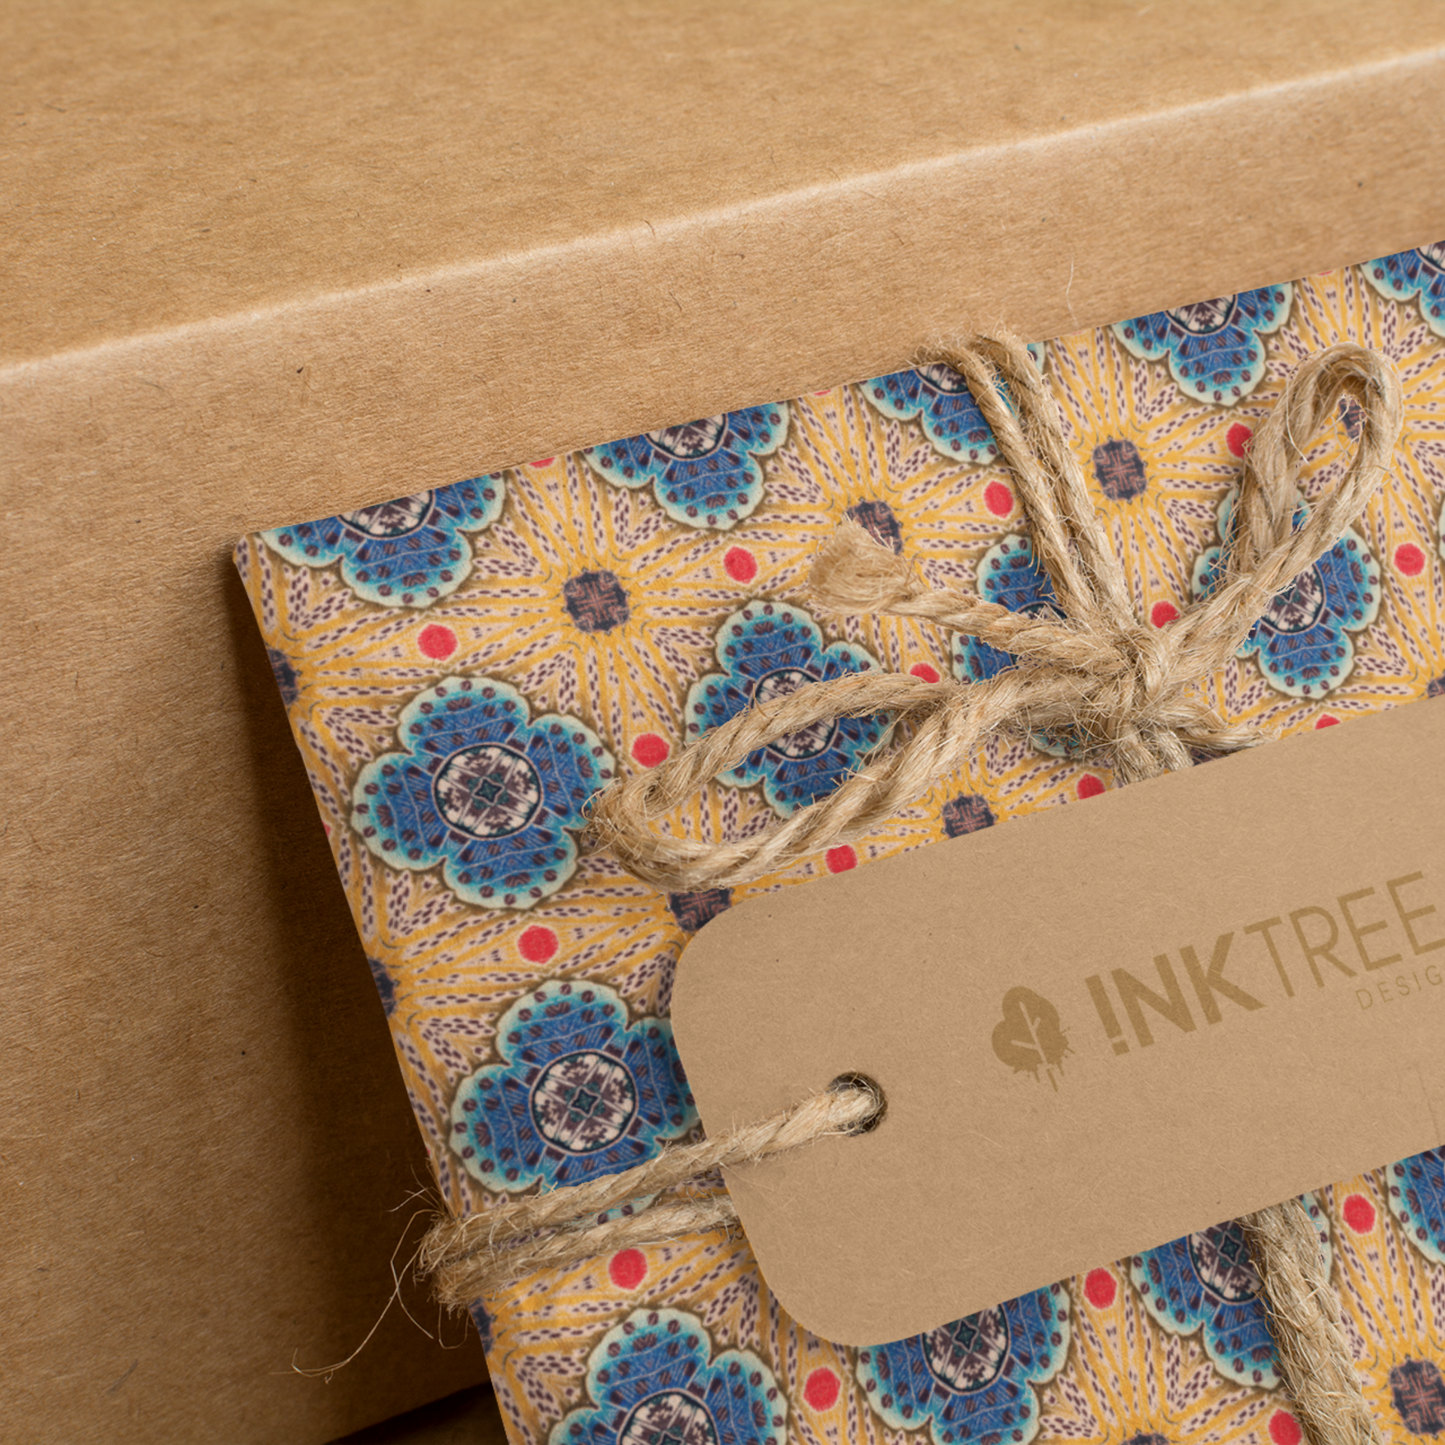 A present wrapped with a gold, black, blue, red and white oriental looking pattern, tied with brown string with a brown paper tag with ink tree design logo on it, leaning on a brown paper background.